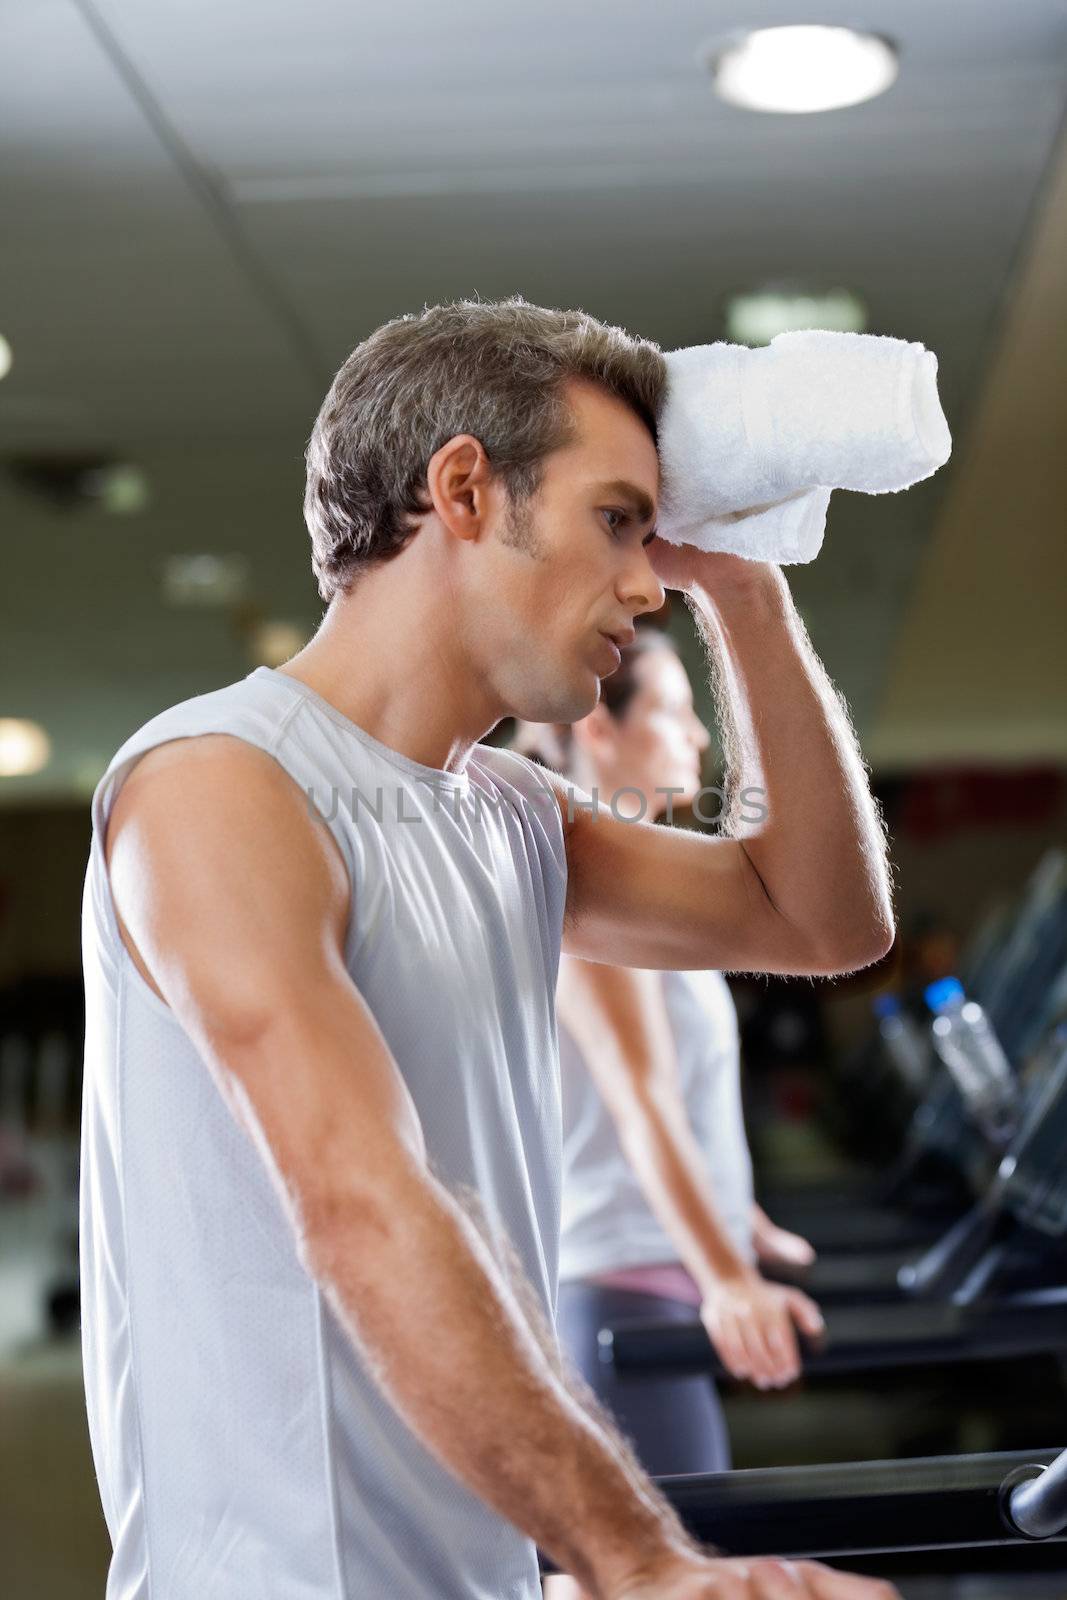 Man Wiping Sweat With Towel At Health Club by leaf